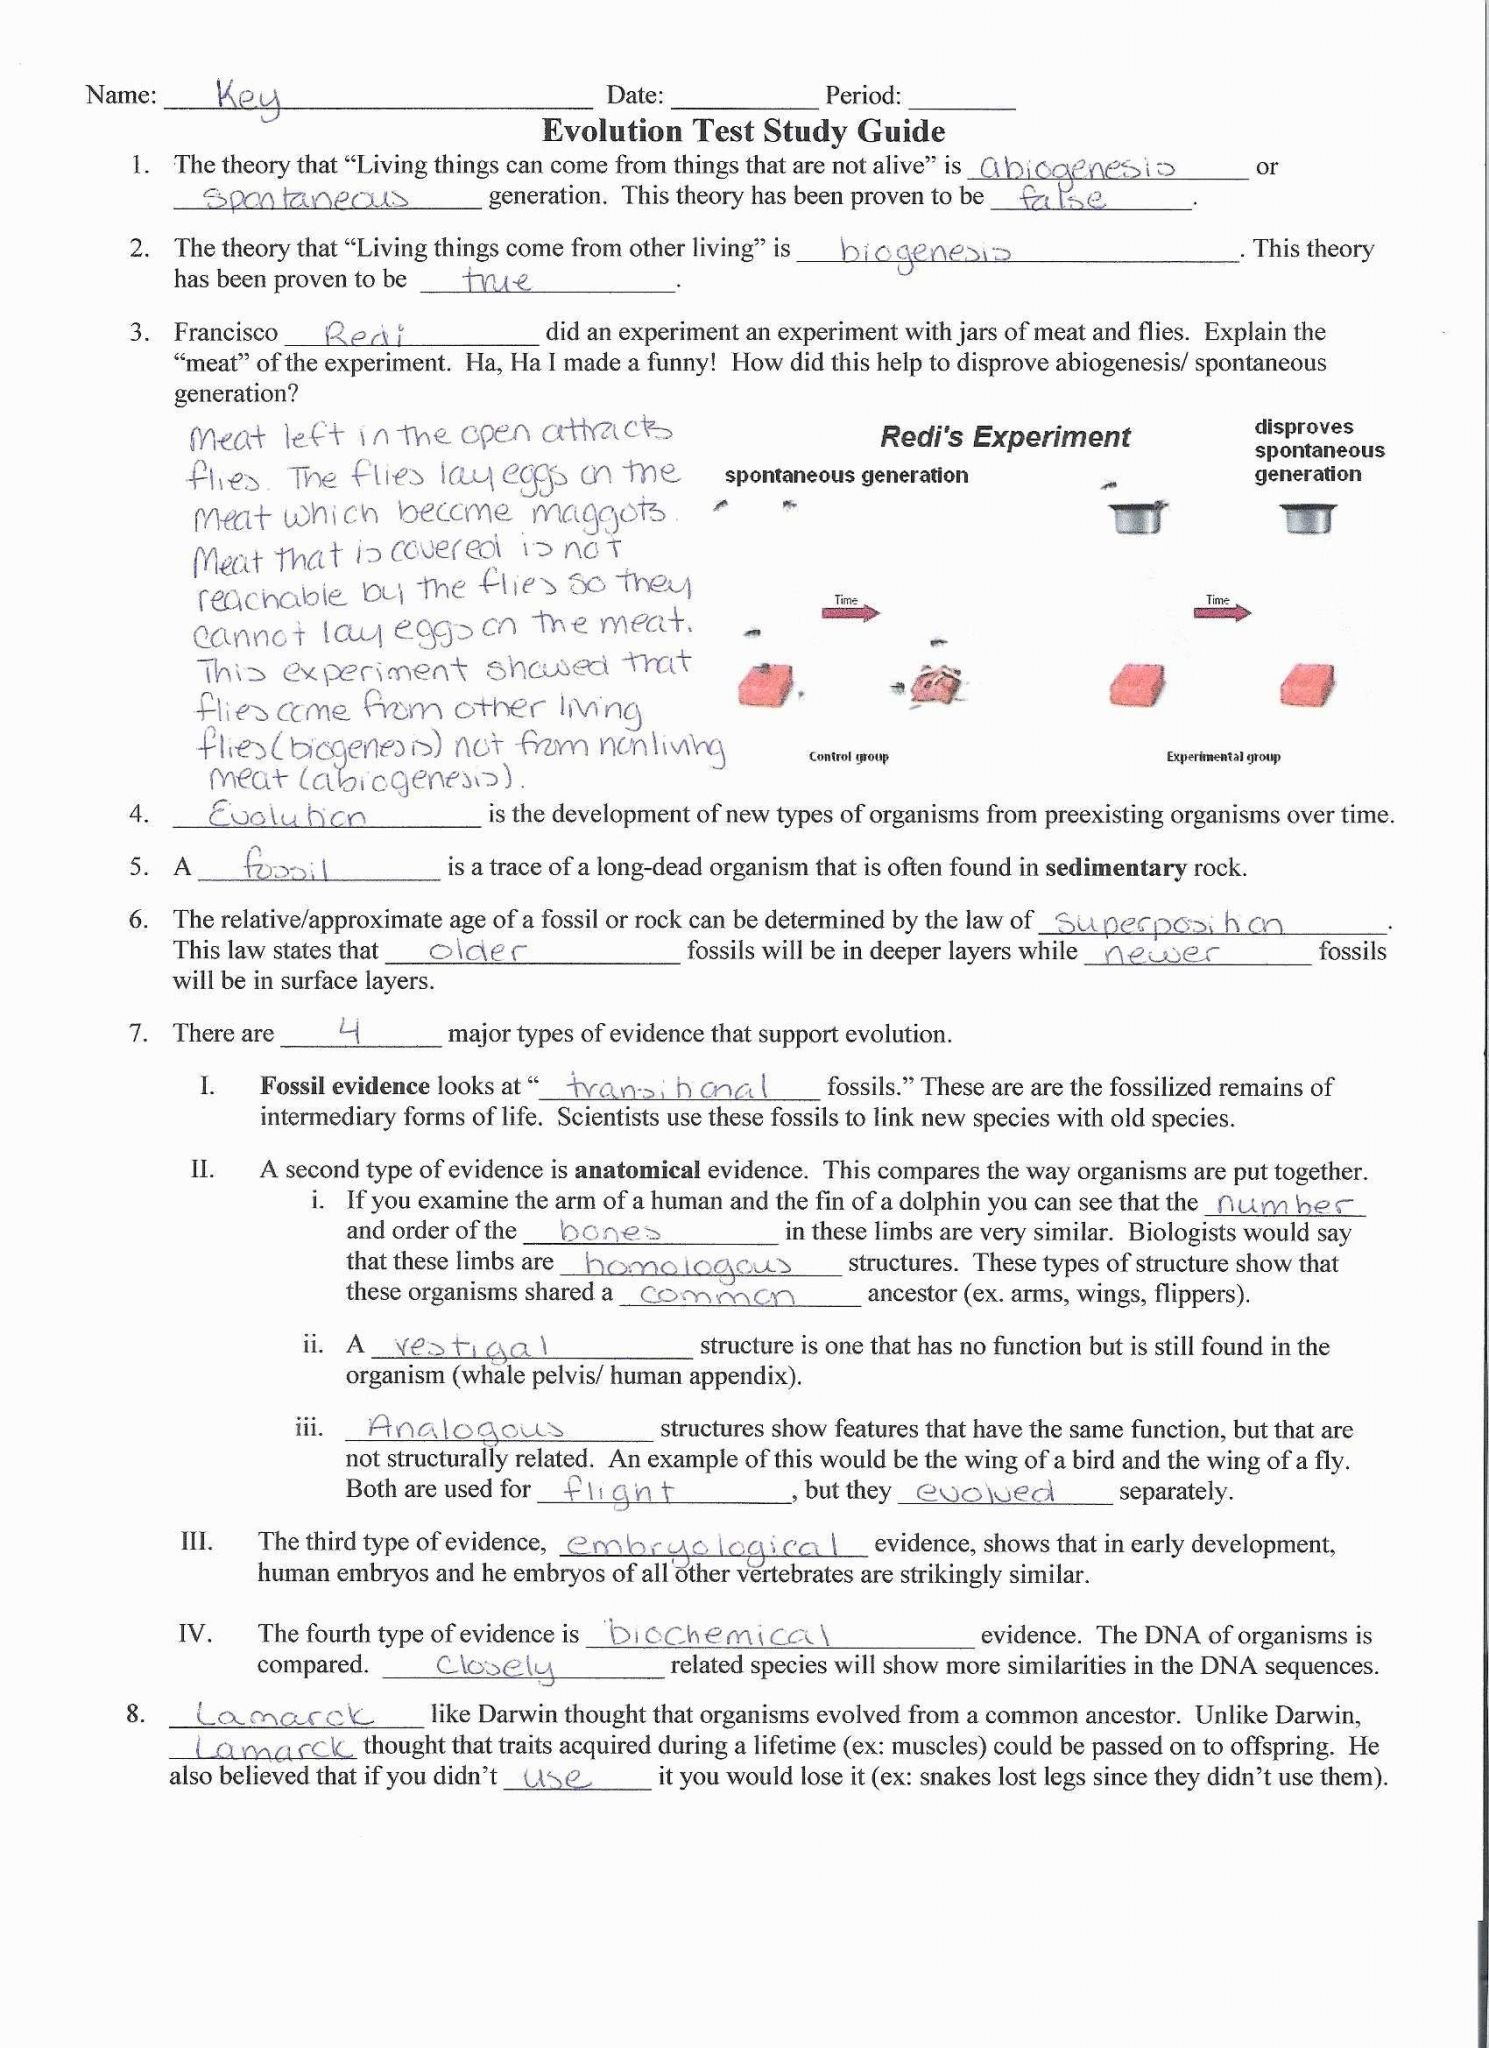 Cellular Transport Worksheet Section A Cell Membrane Structure Together With Cellular Transport Worksheet Section A Cell Membrane Structure Answer Key